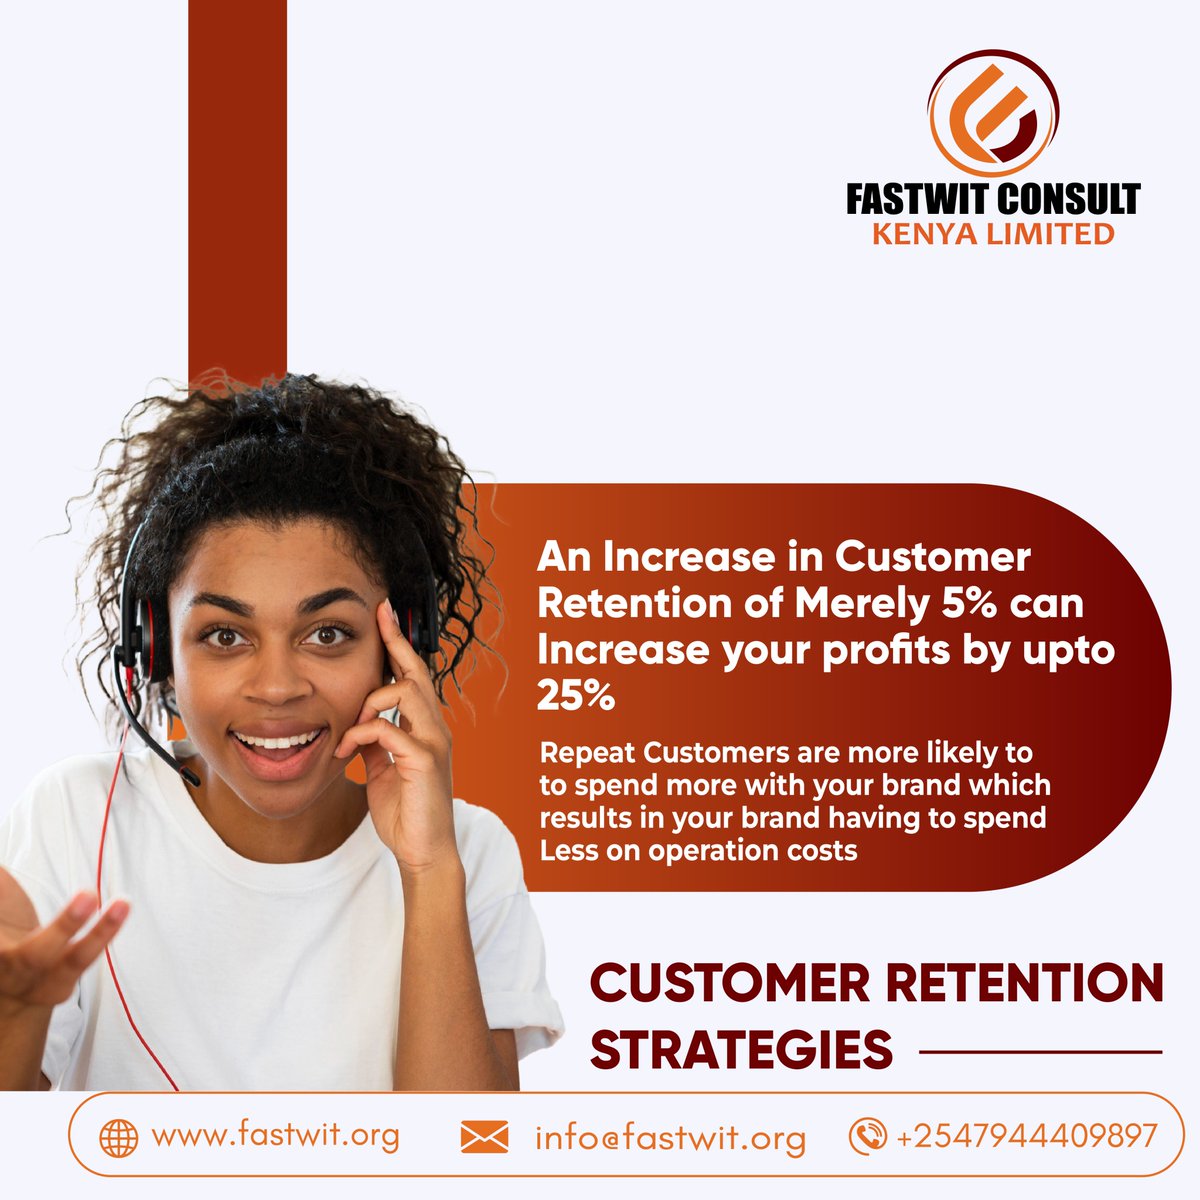 In addition to sending surveys, impromptu conversations can spark your creativity and motivate you to customize your offerings or develop new services.
fastwit.org
#customerrelationshipmanagement #CustomerService #customerfeedback